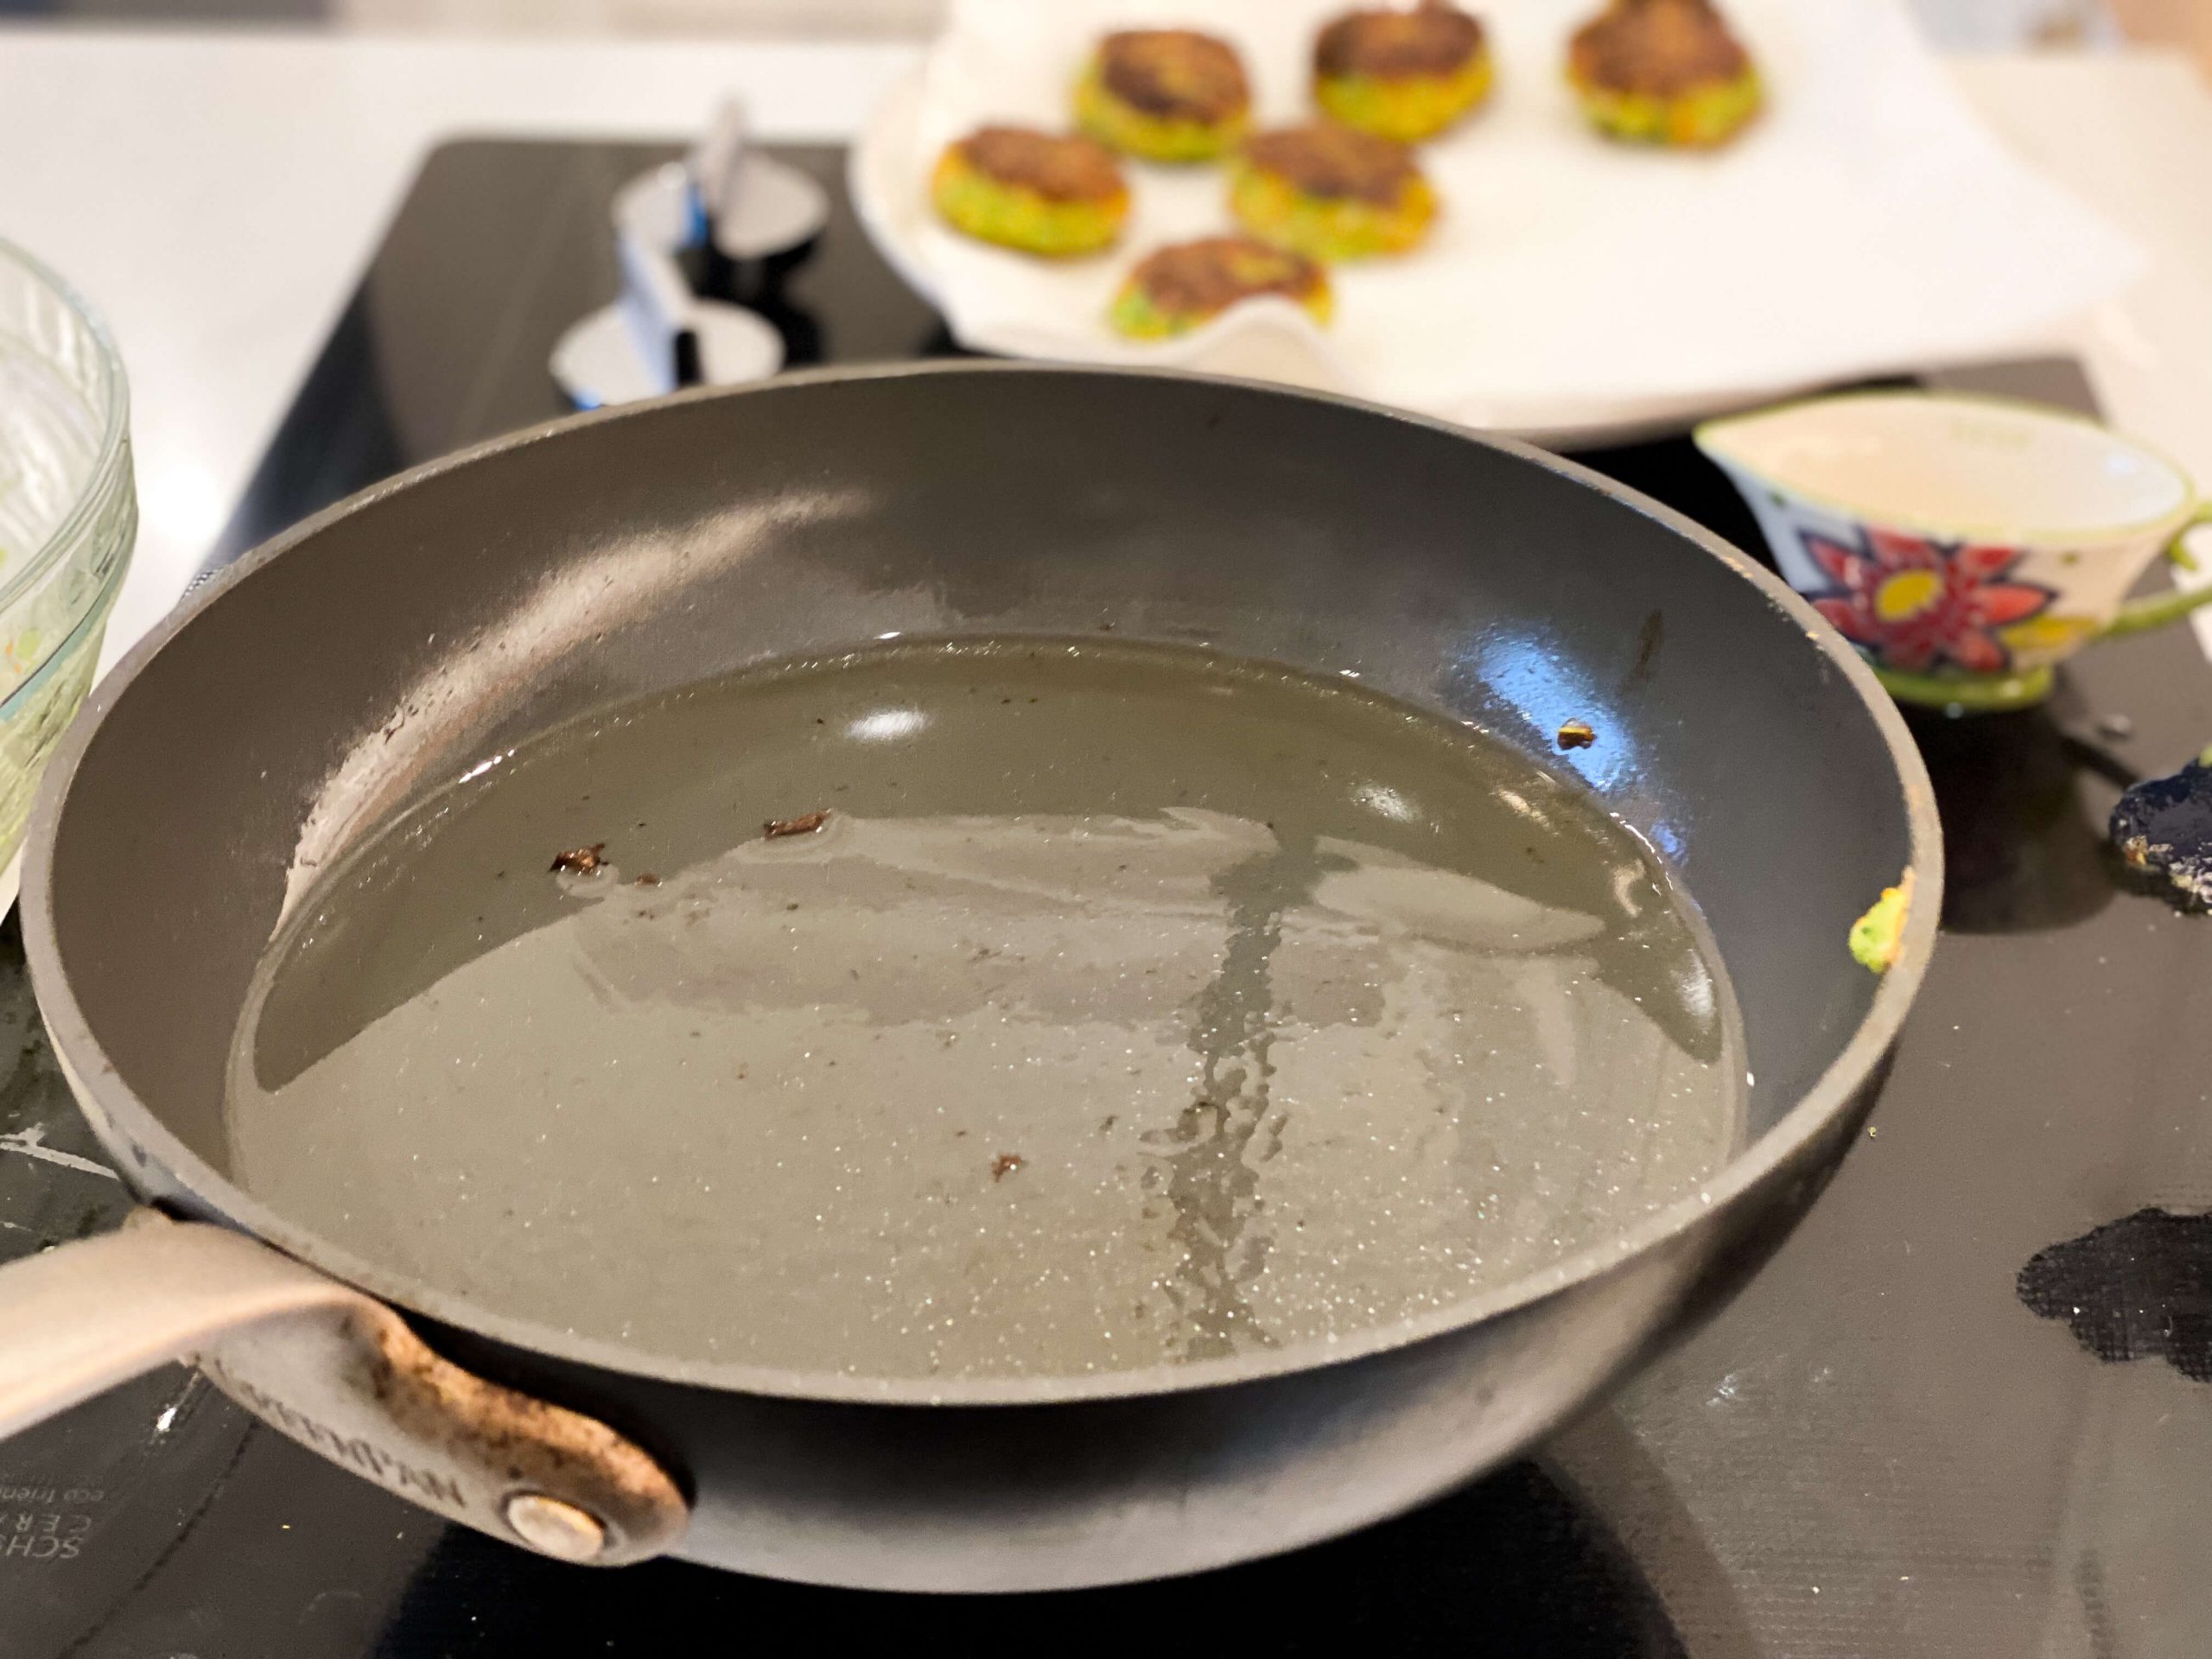 oil heated ready to cook the broccoli bites